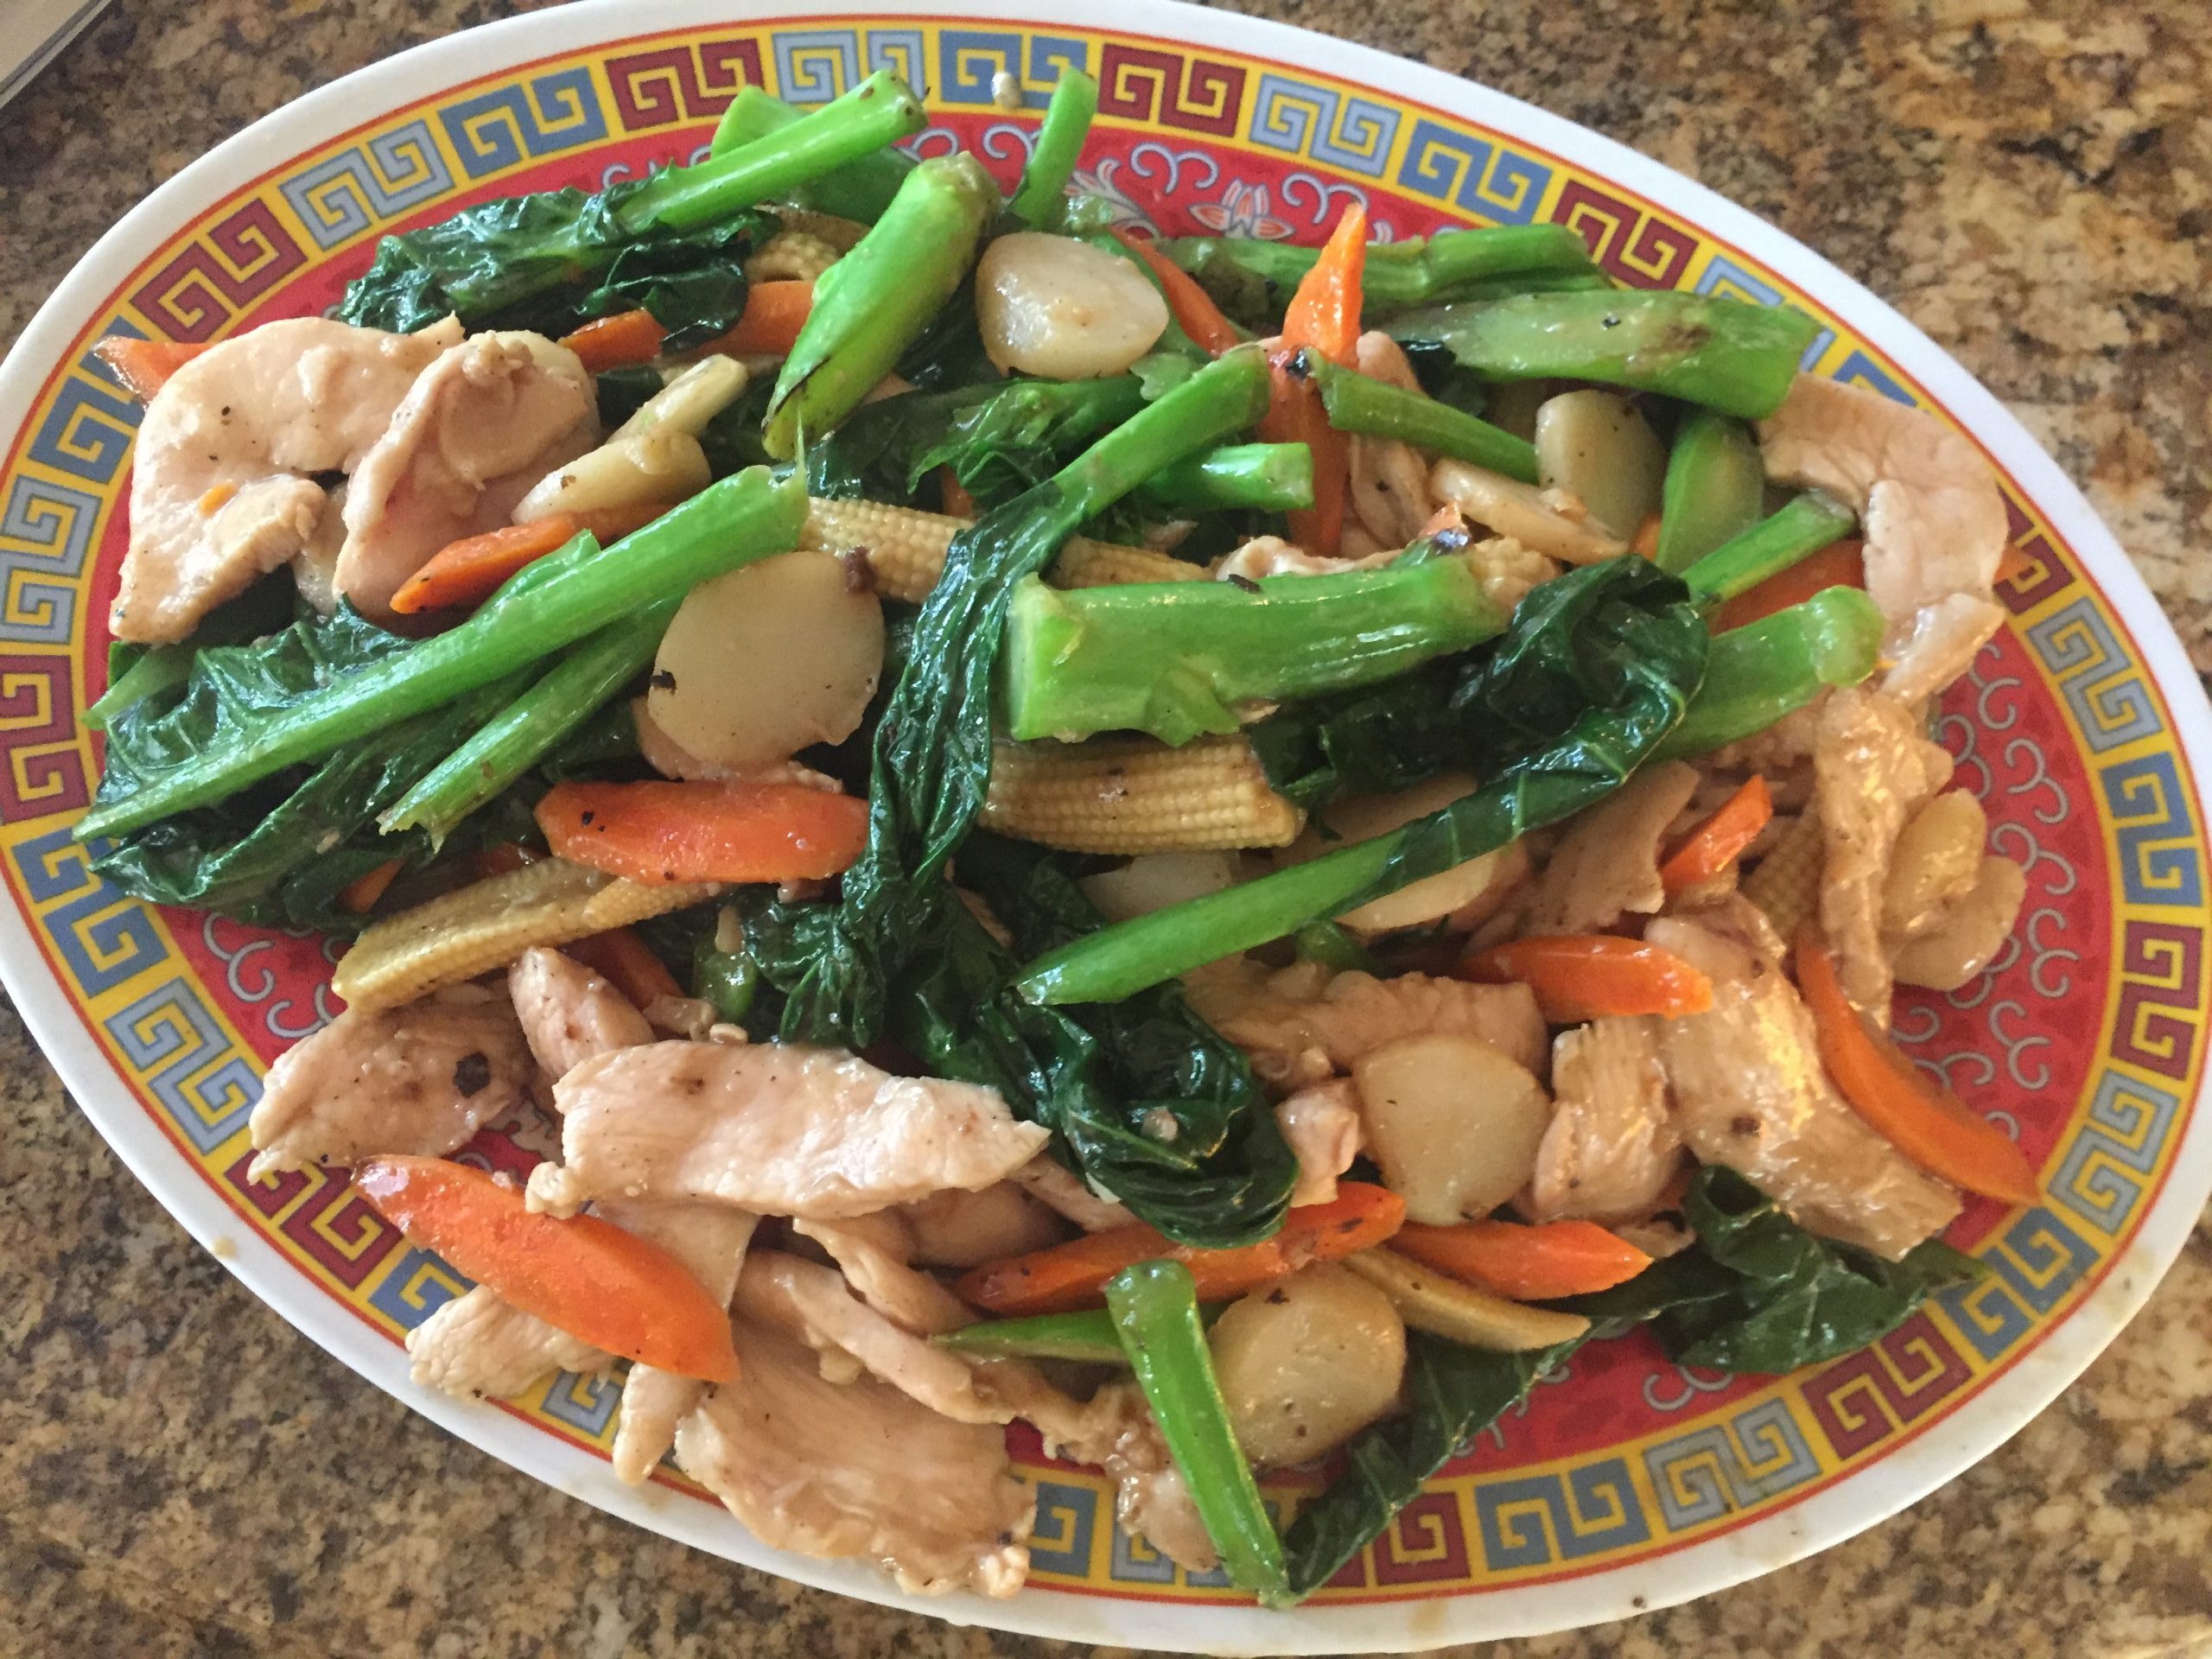 Stir fry vegetables with meat